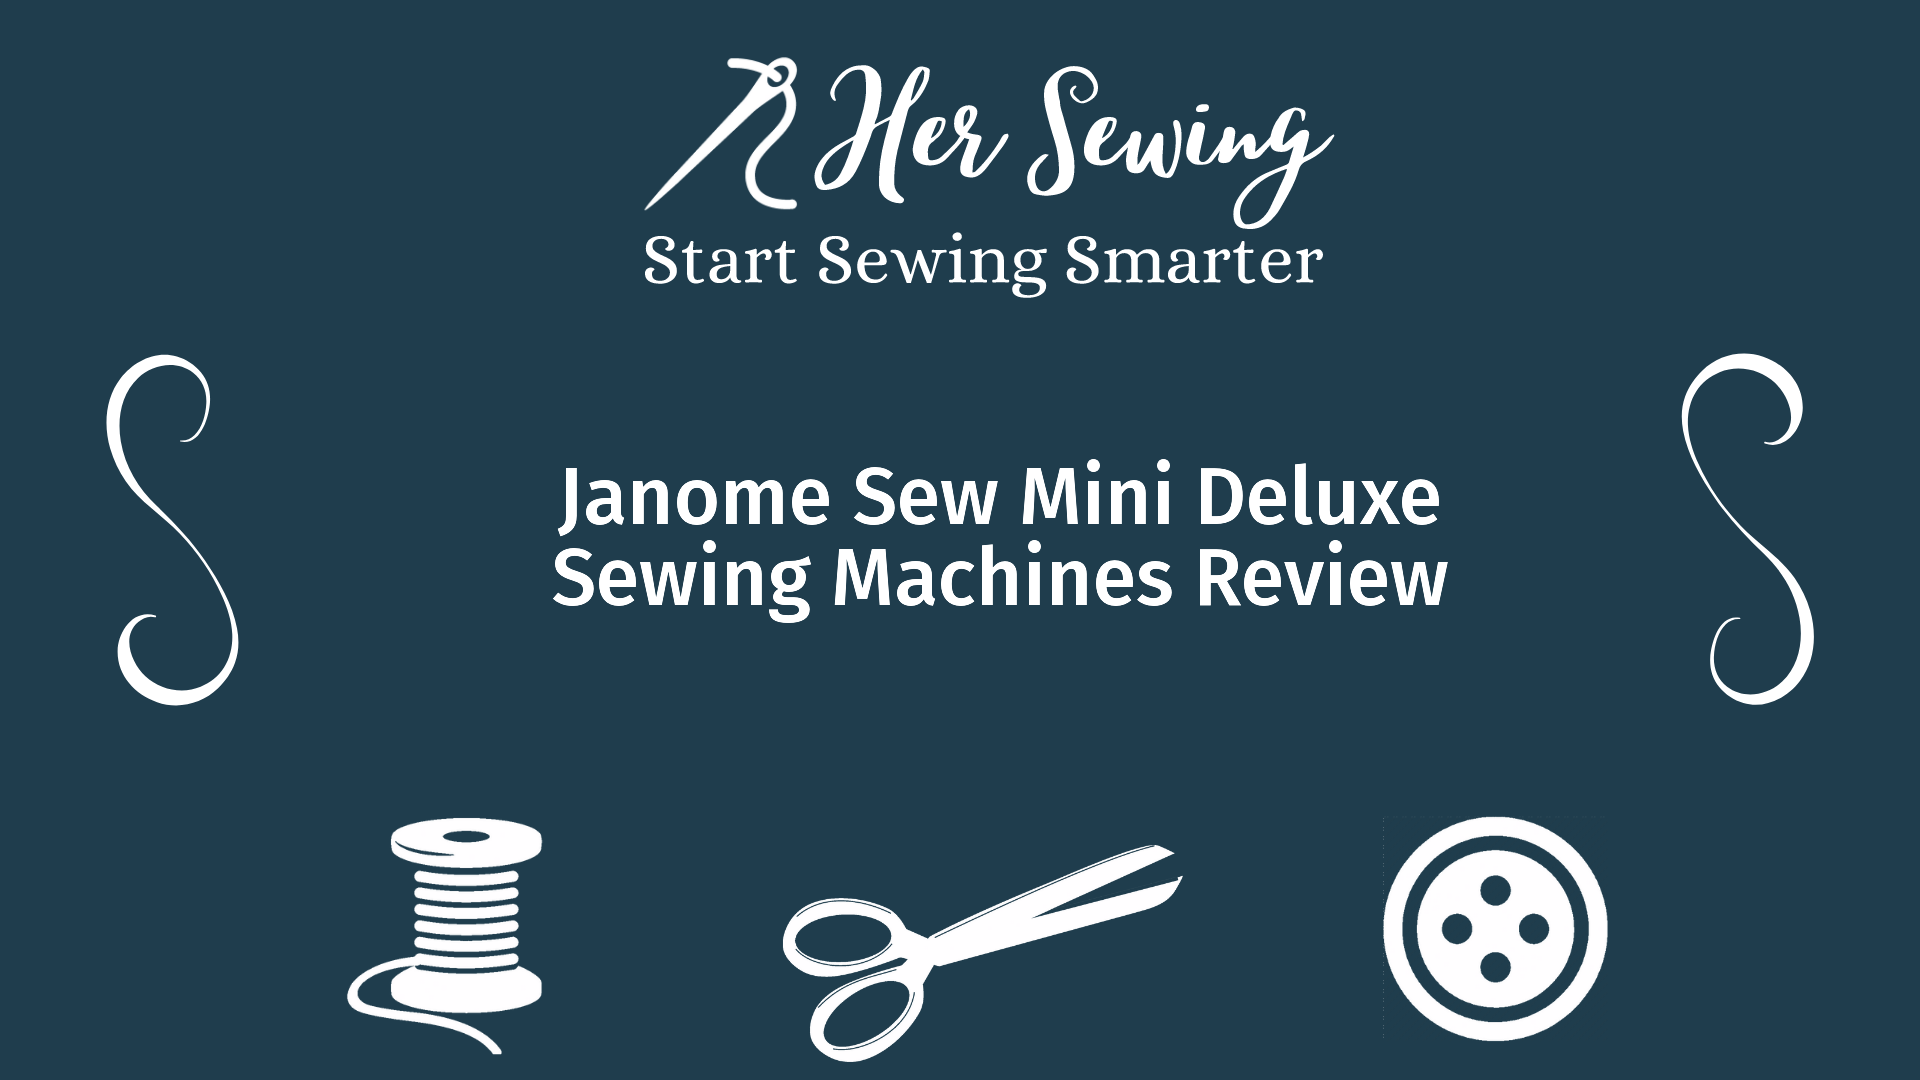 Janome Sew Mini Deluxe Sewing Machines Review